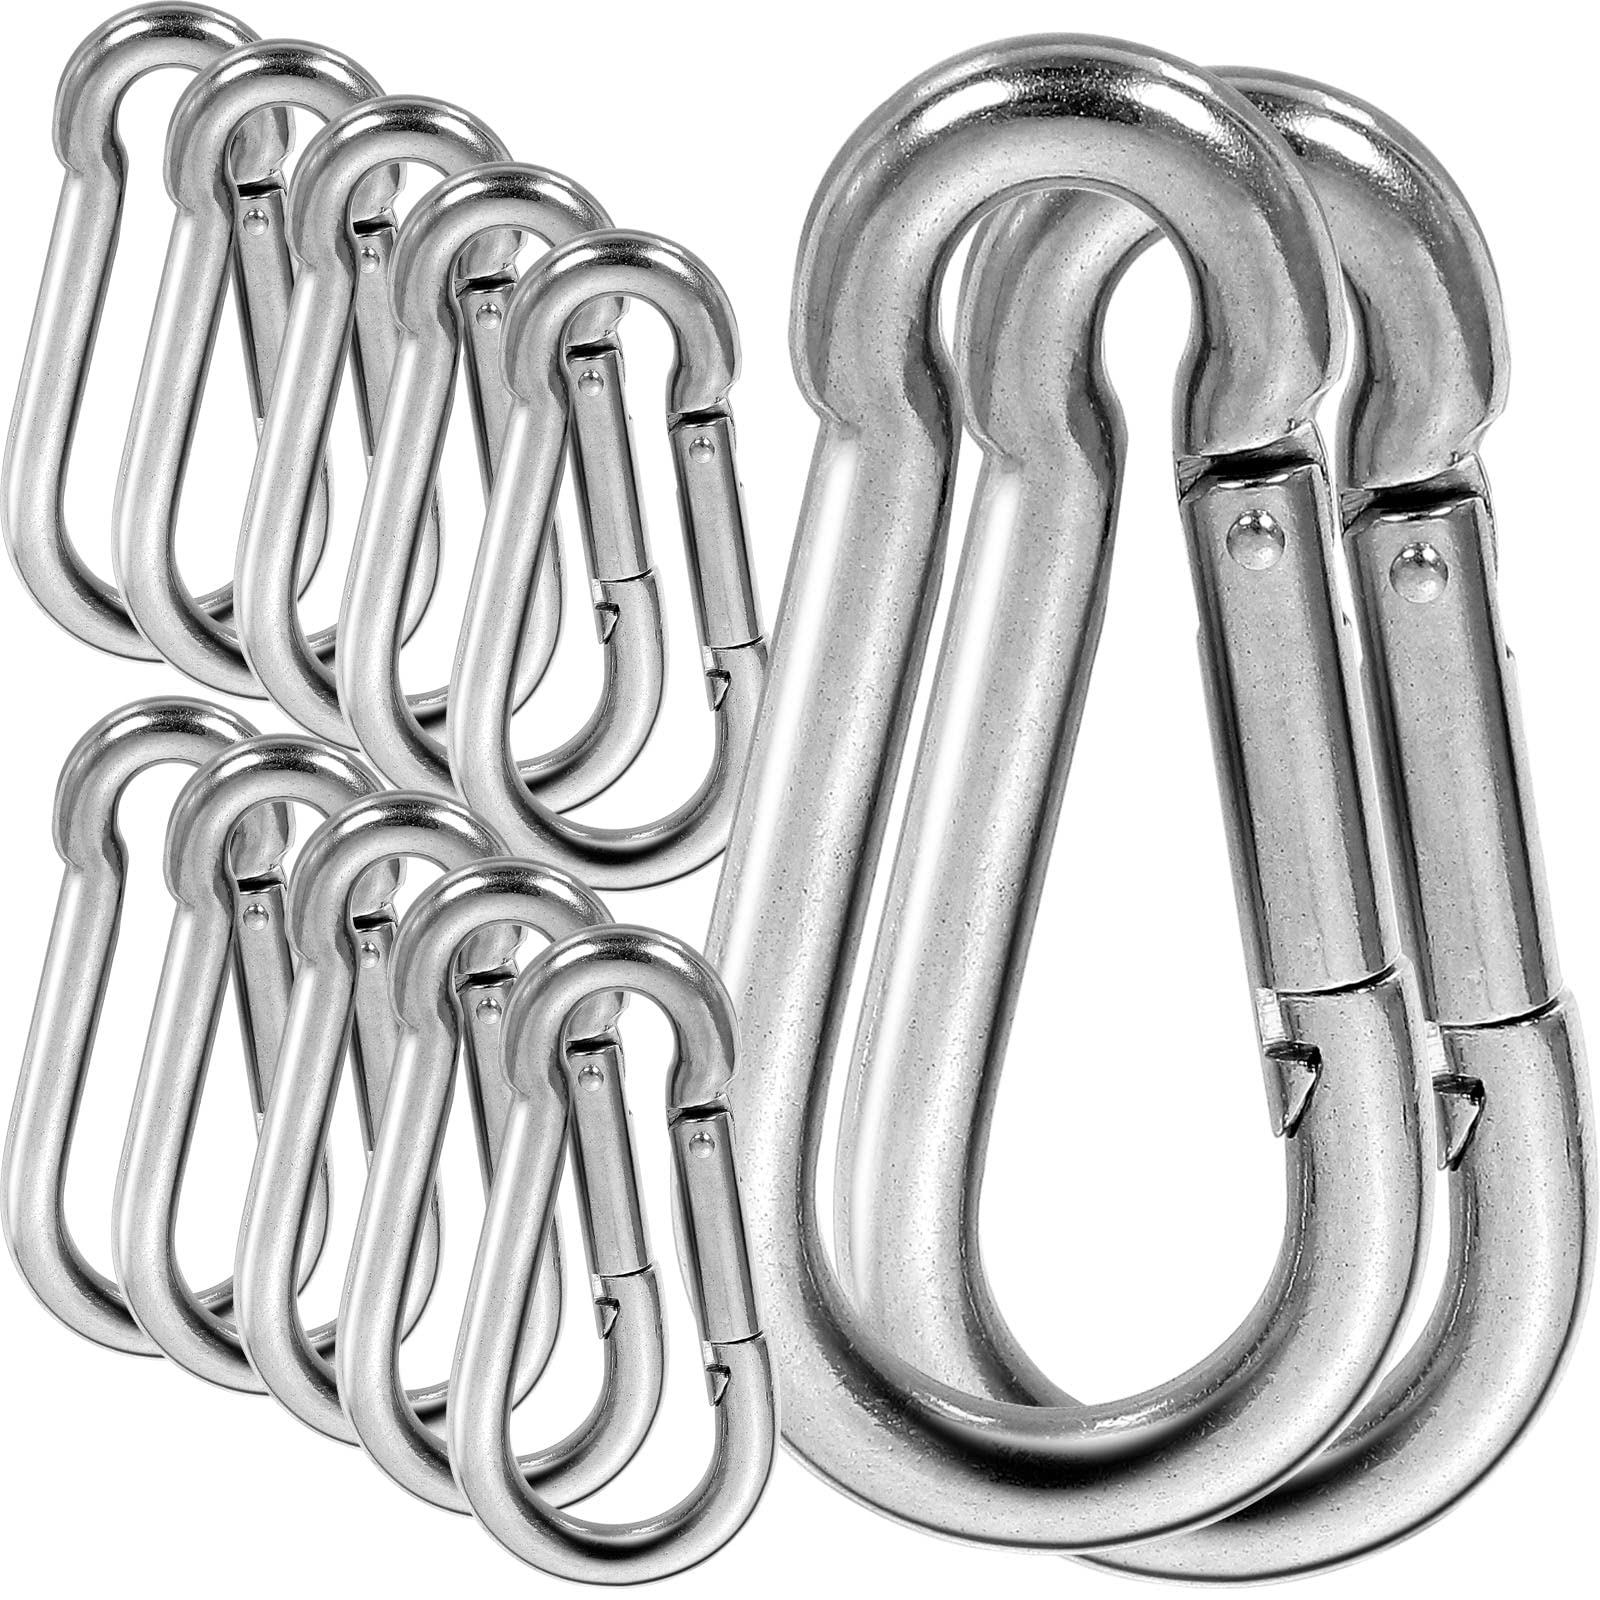 Heavy Duty Stainless Steel Spring Buckle Snap Hooks Carabiner Clip Camping  Clasp